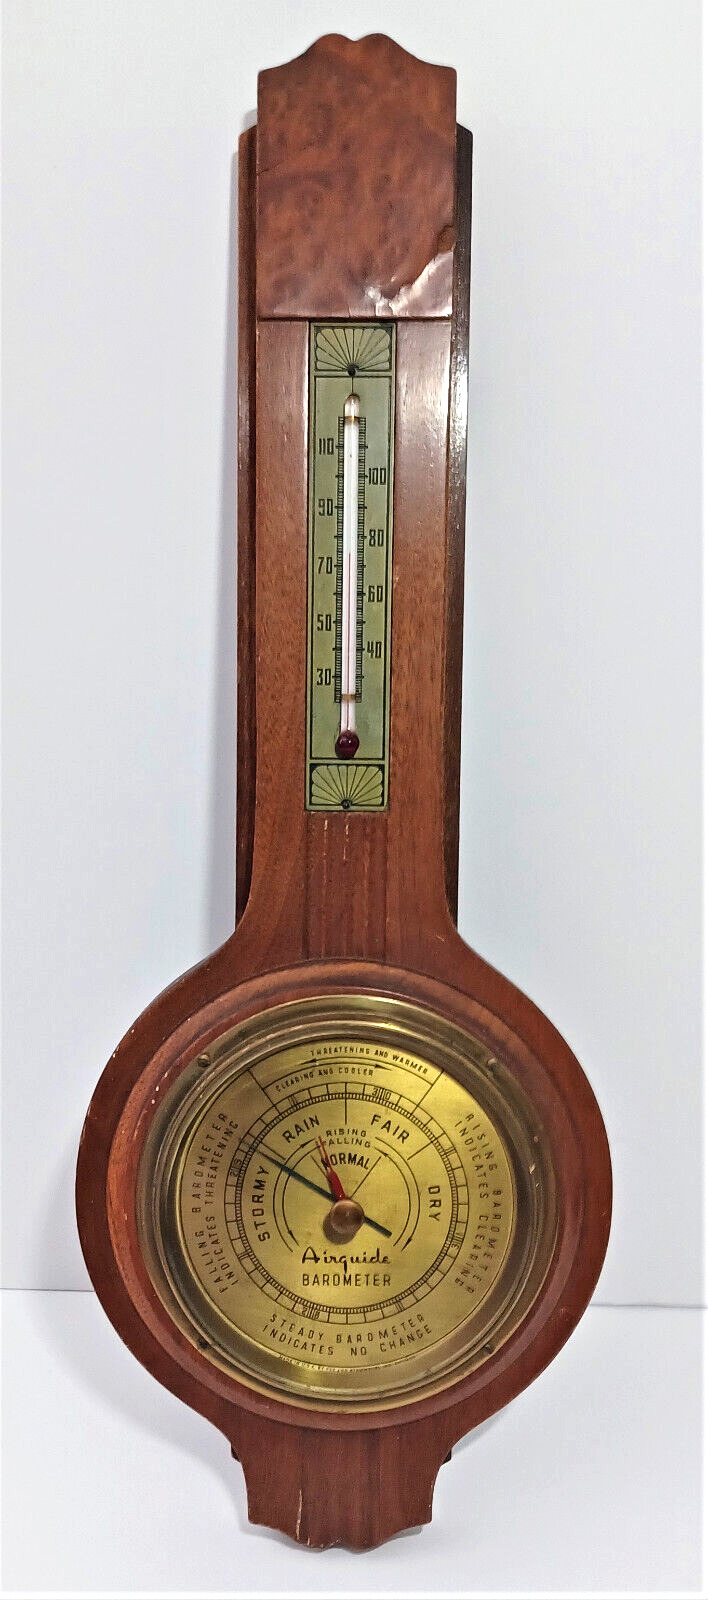 Vintage 1950s Airguide Barometer Thermometer Wooden Wall Hanger Made in USA